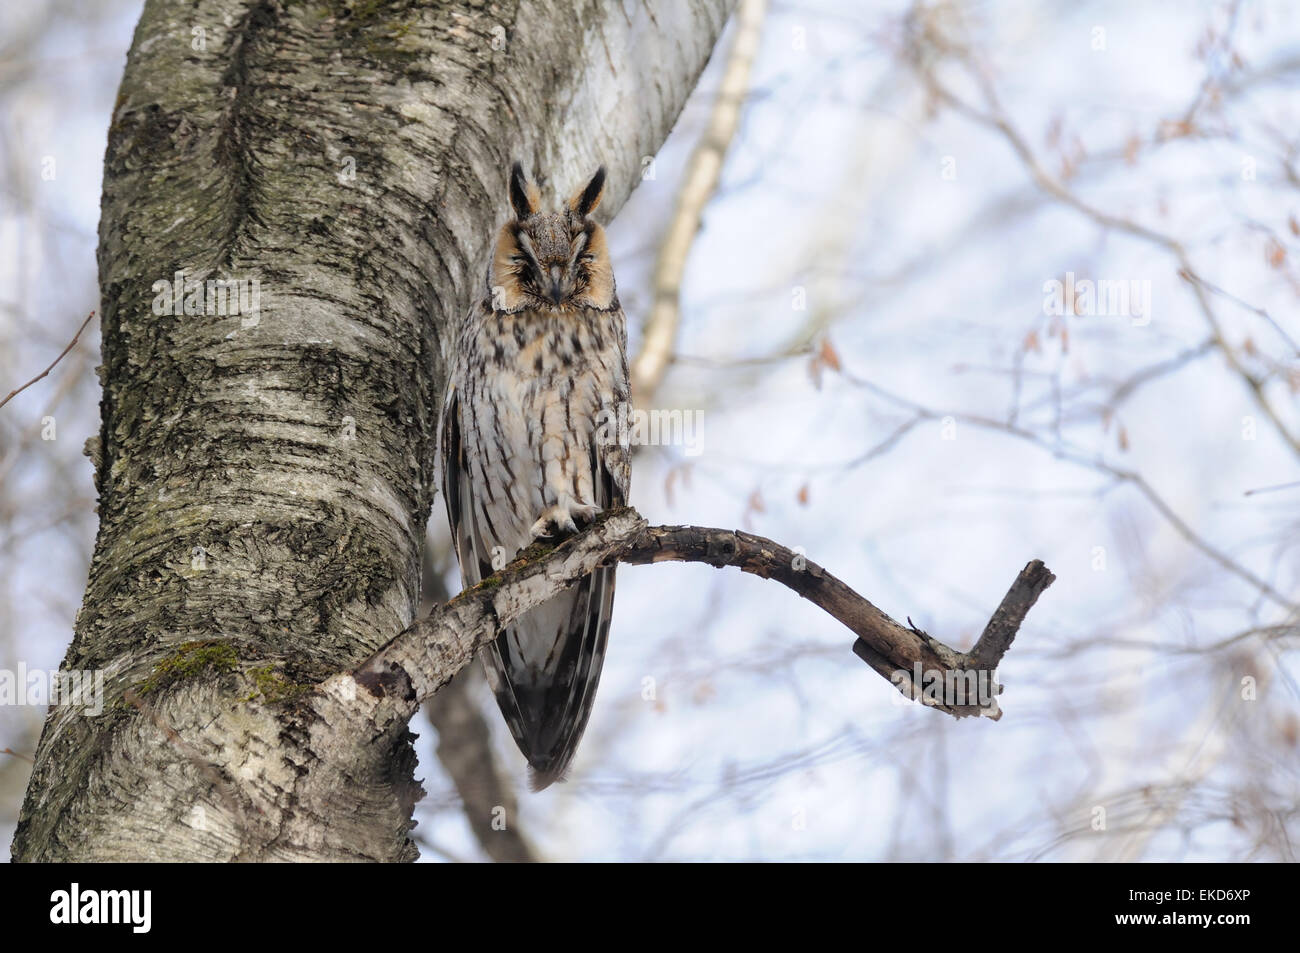 Long-eared Owl at the tree Stock Photo